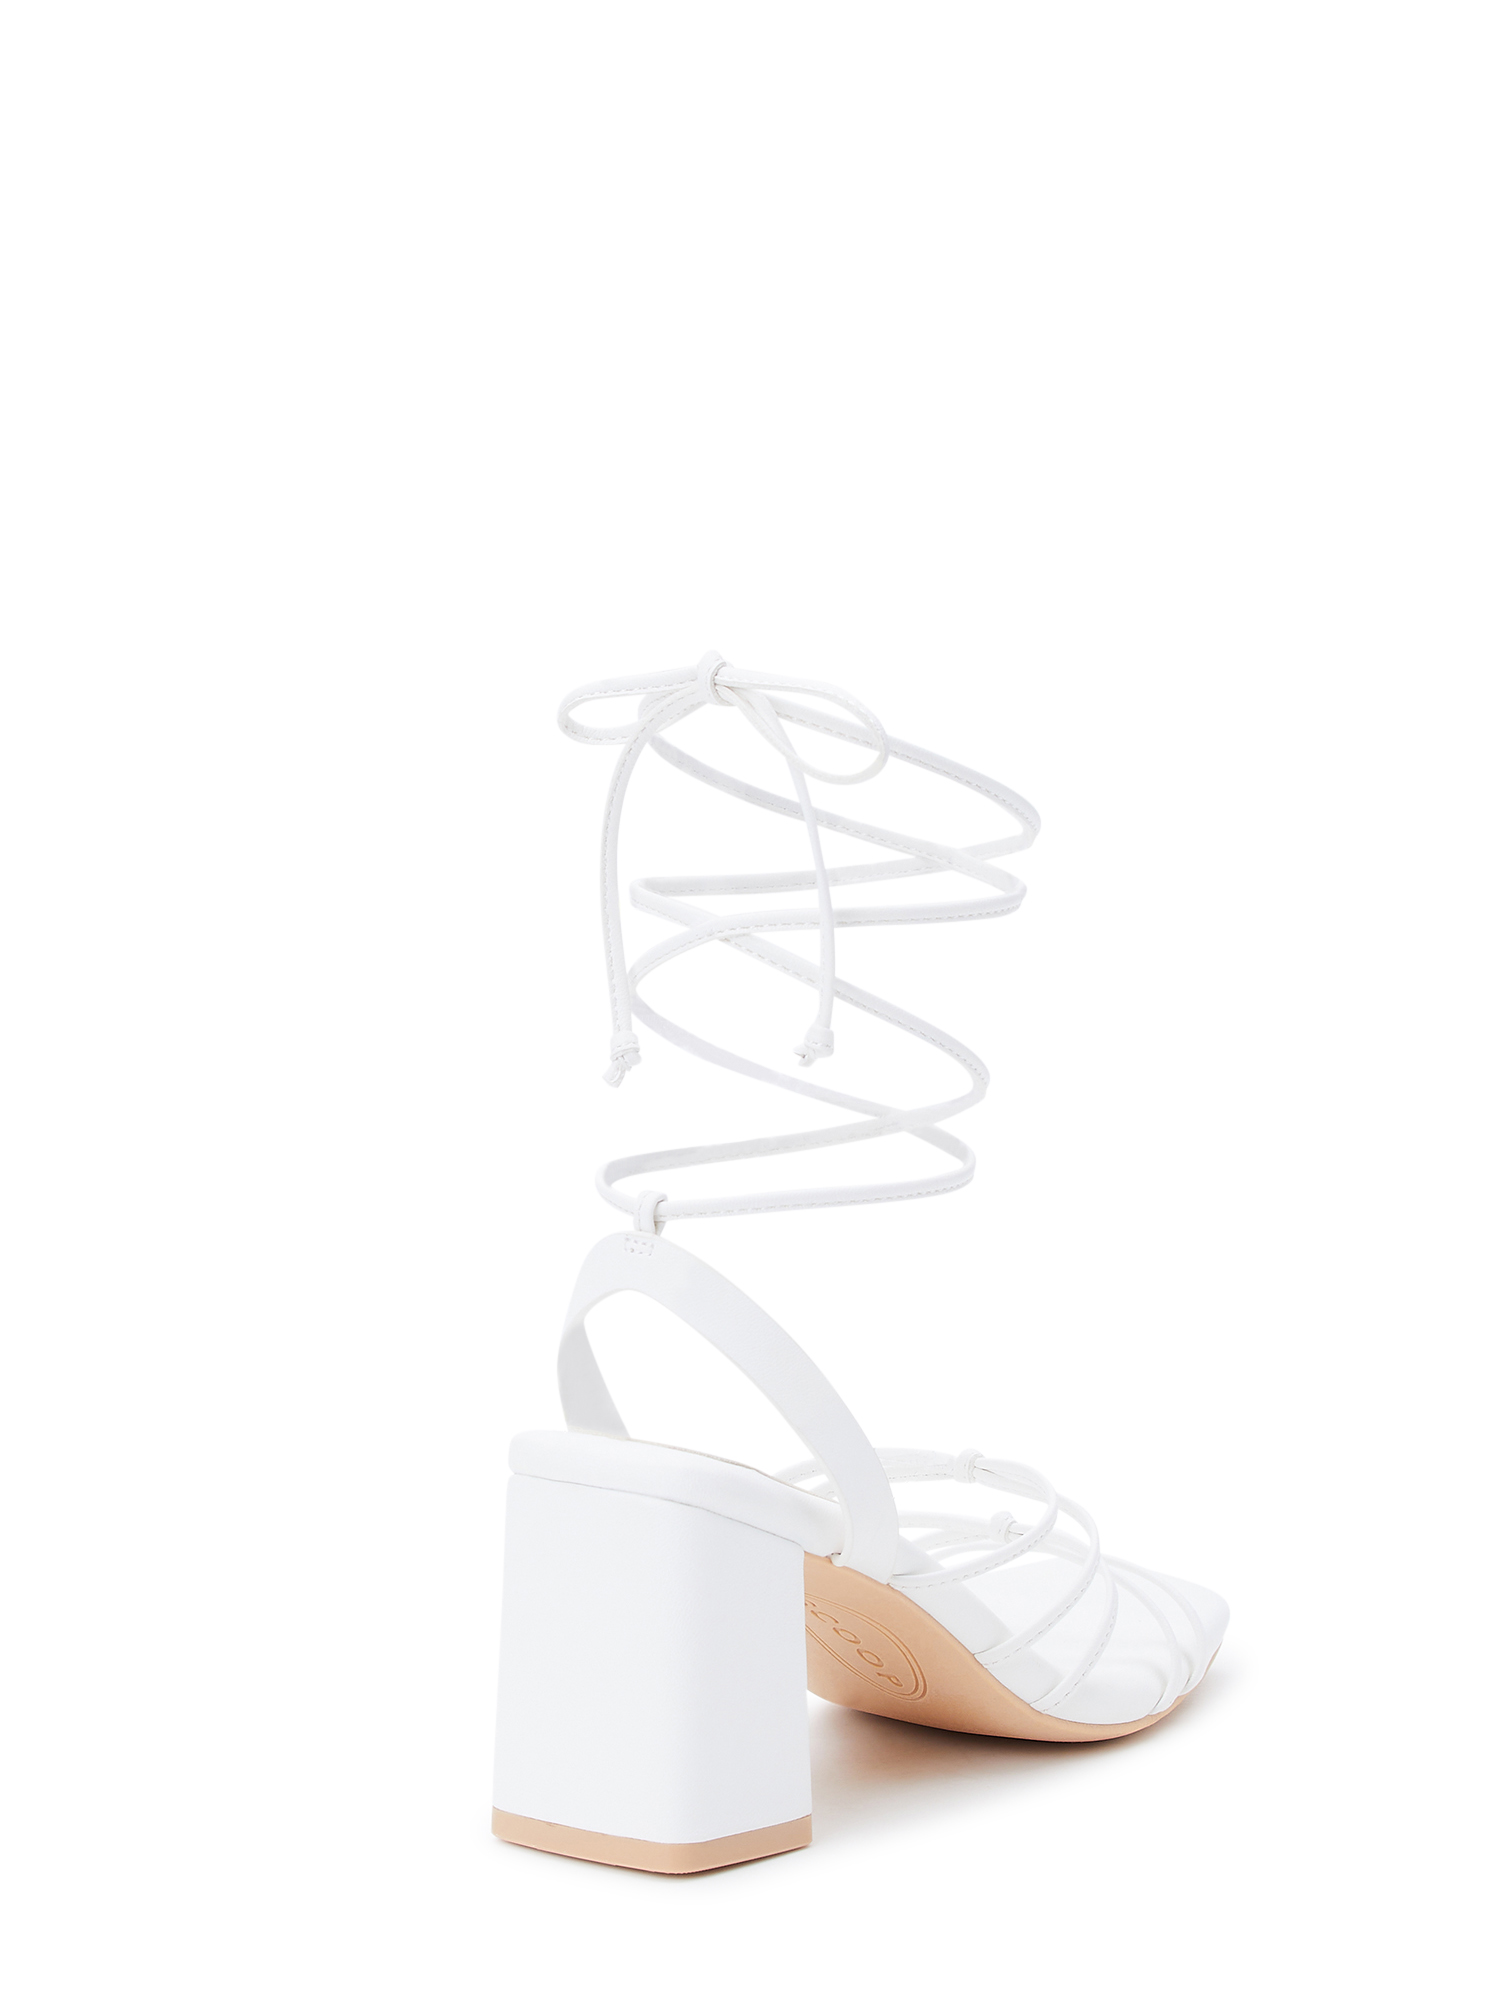 Dimona Strappy Block Heeled Sandal Shoes in White - Get great deals at  JustFab